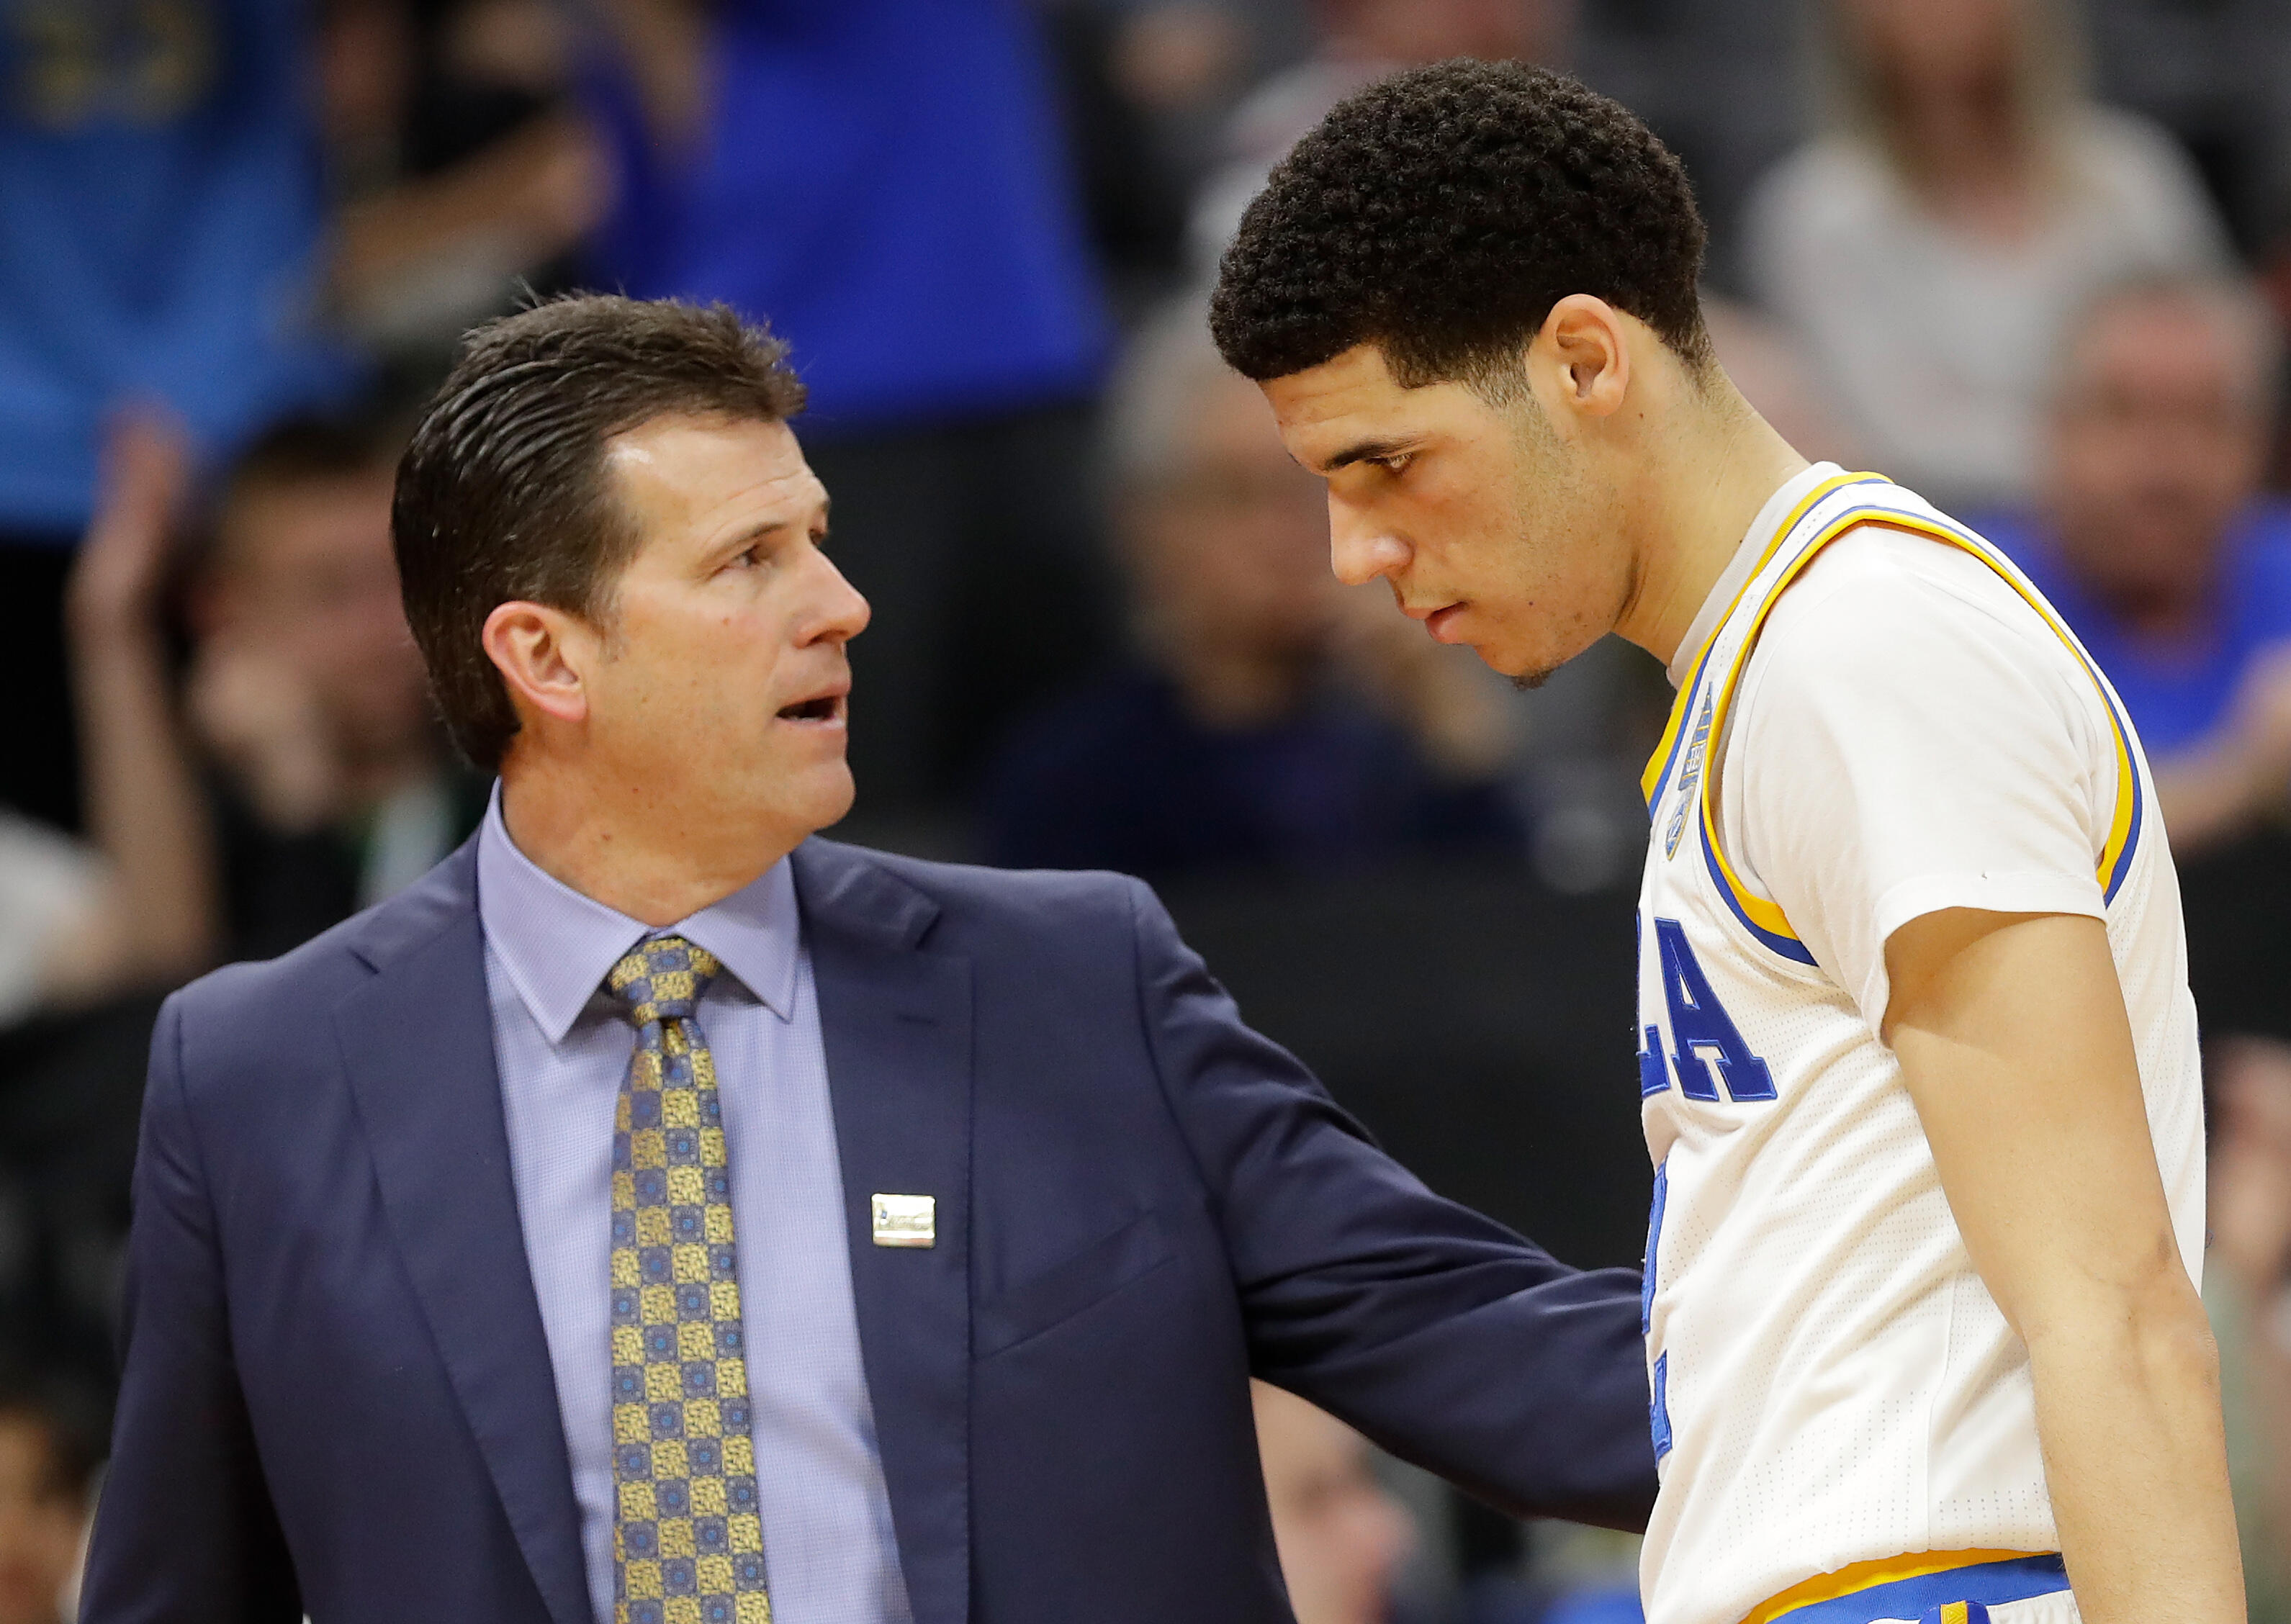 SACRAMENTO, CA - MARCH 17:  Lonzo Ball #2 is congratulated by his Head coach Steve Alford of the UCLA Bruins as his team defeats the Kent State Golden Flashes during the first round of the 2017 NCAA Men's Basketball Tournament at Golden 1 Center on March 